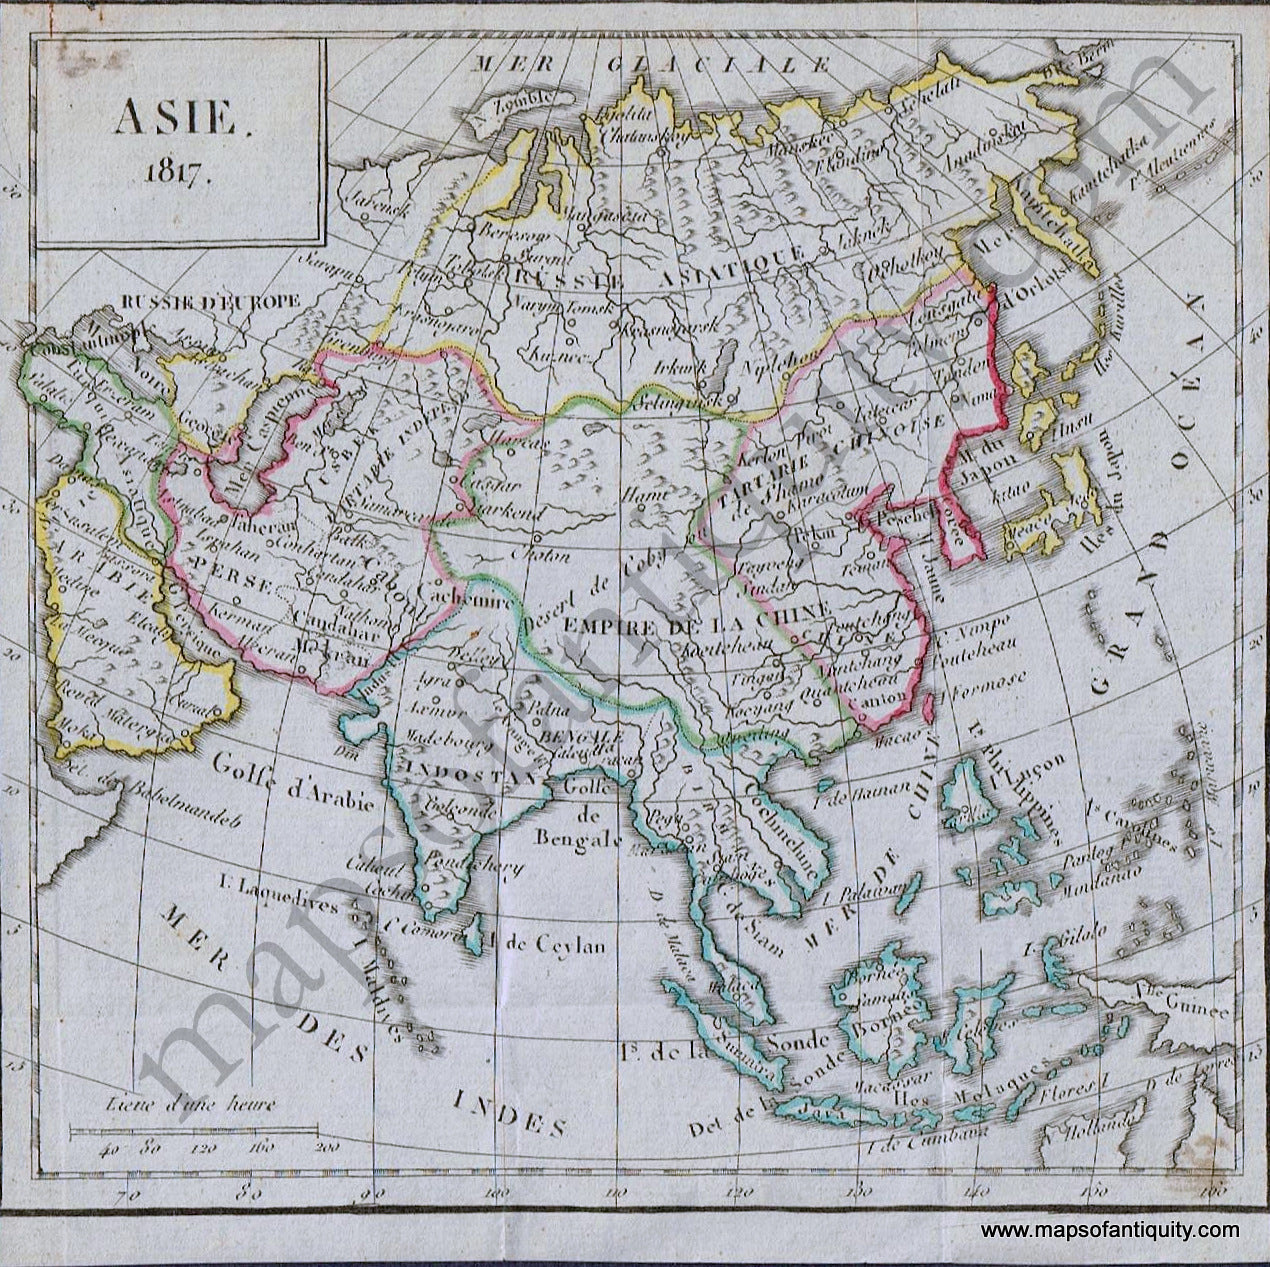 Antique-Hand-Colored-Map-Asie.-1817.-c.-1817-Unknown-1800s-19th-century-Maps-of-Antiquity